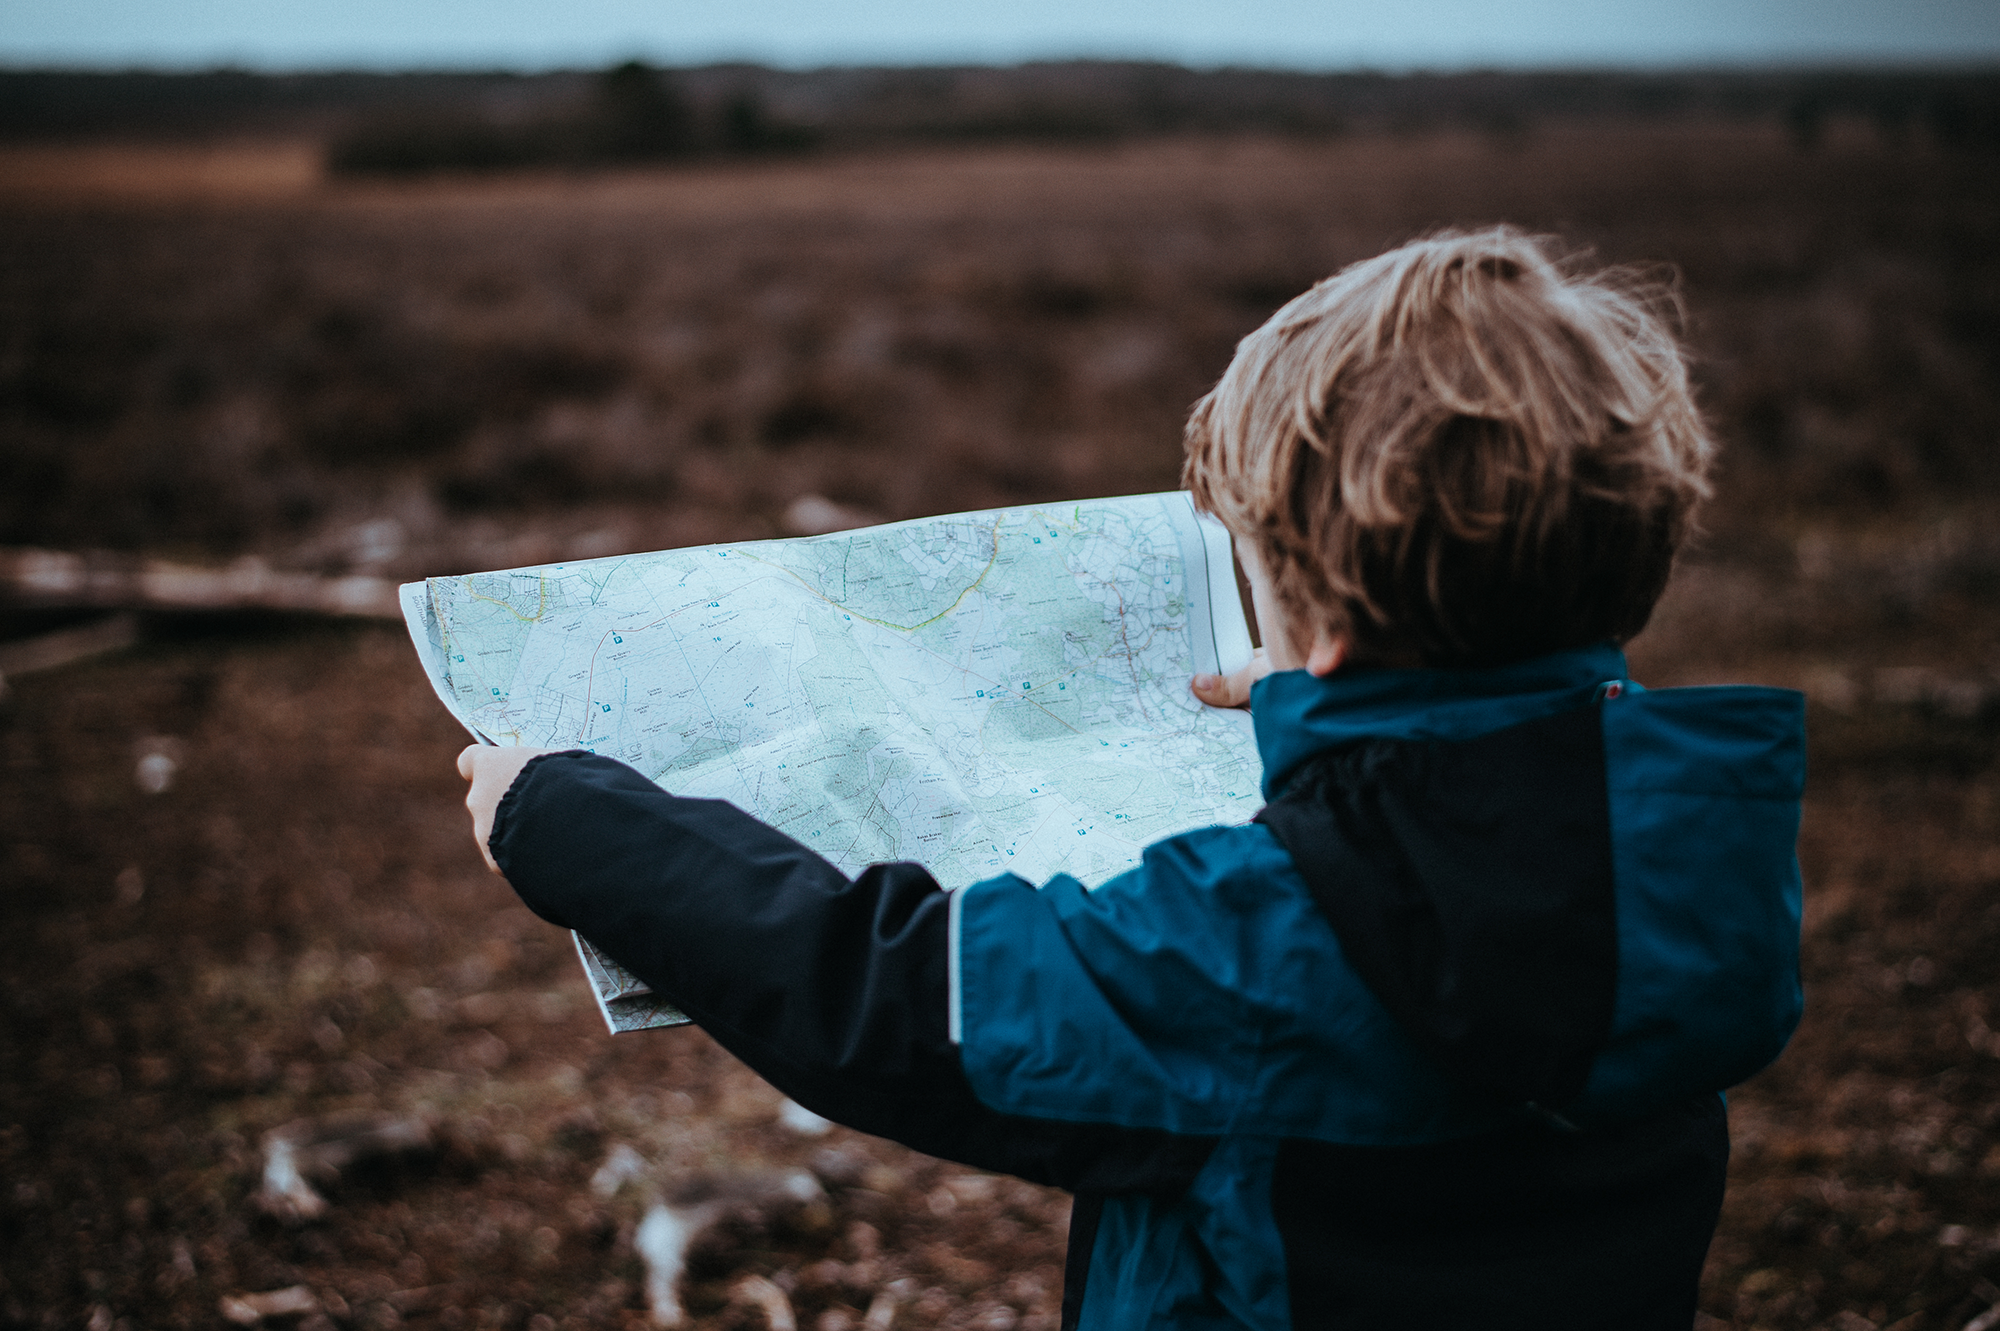 Child with map